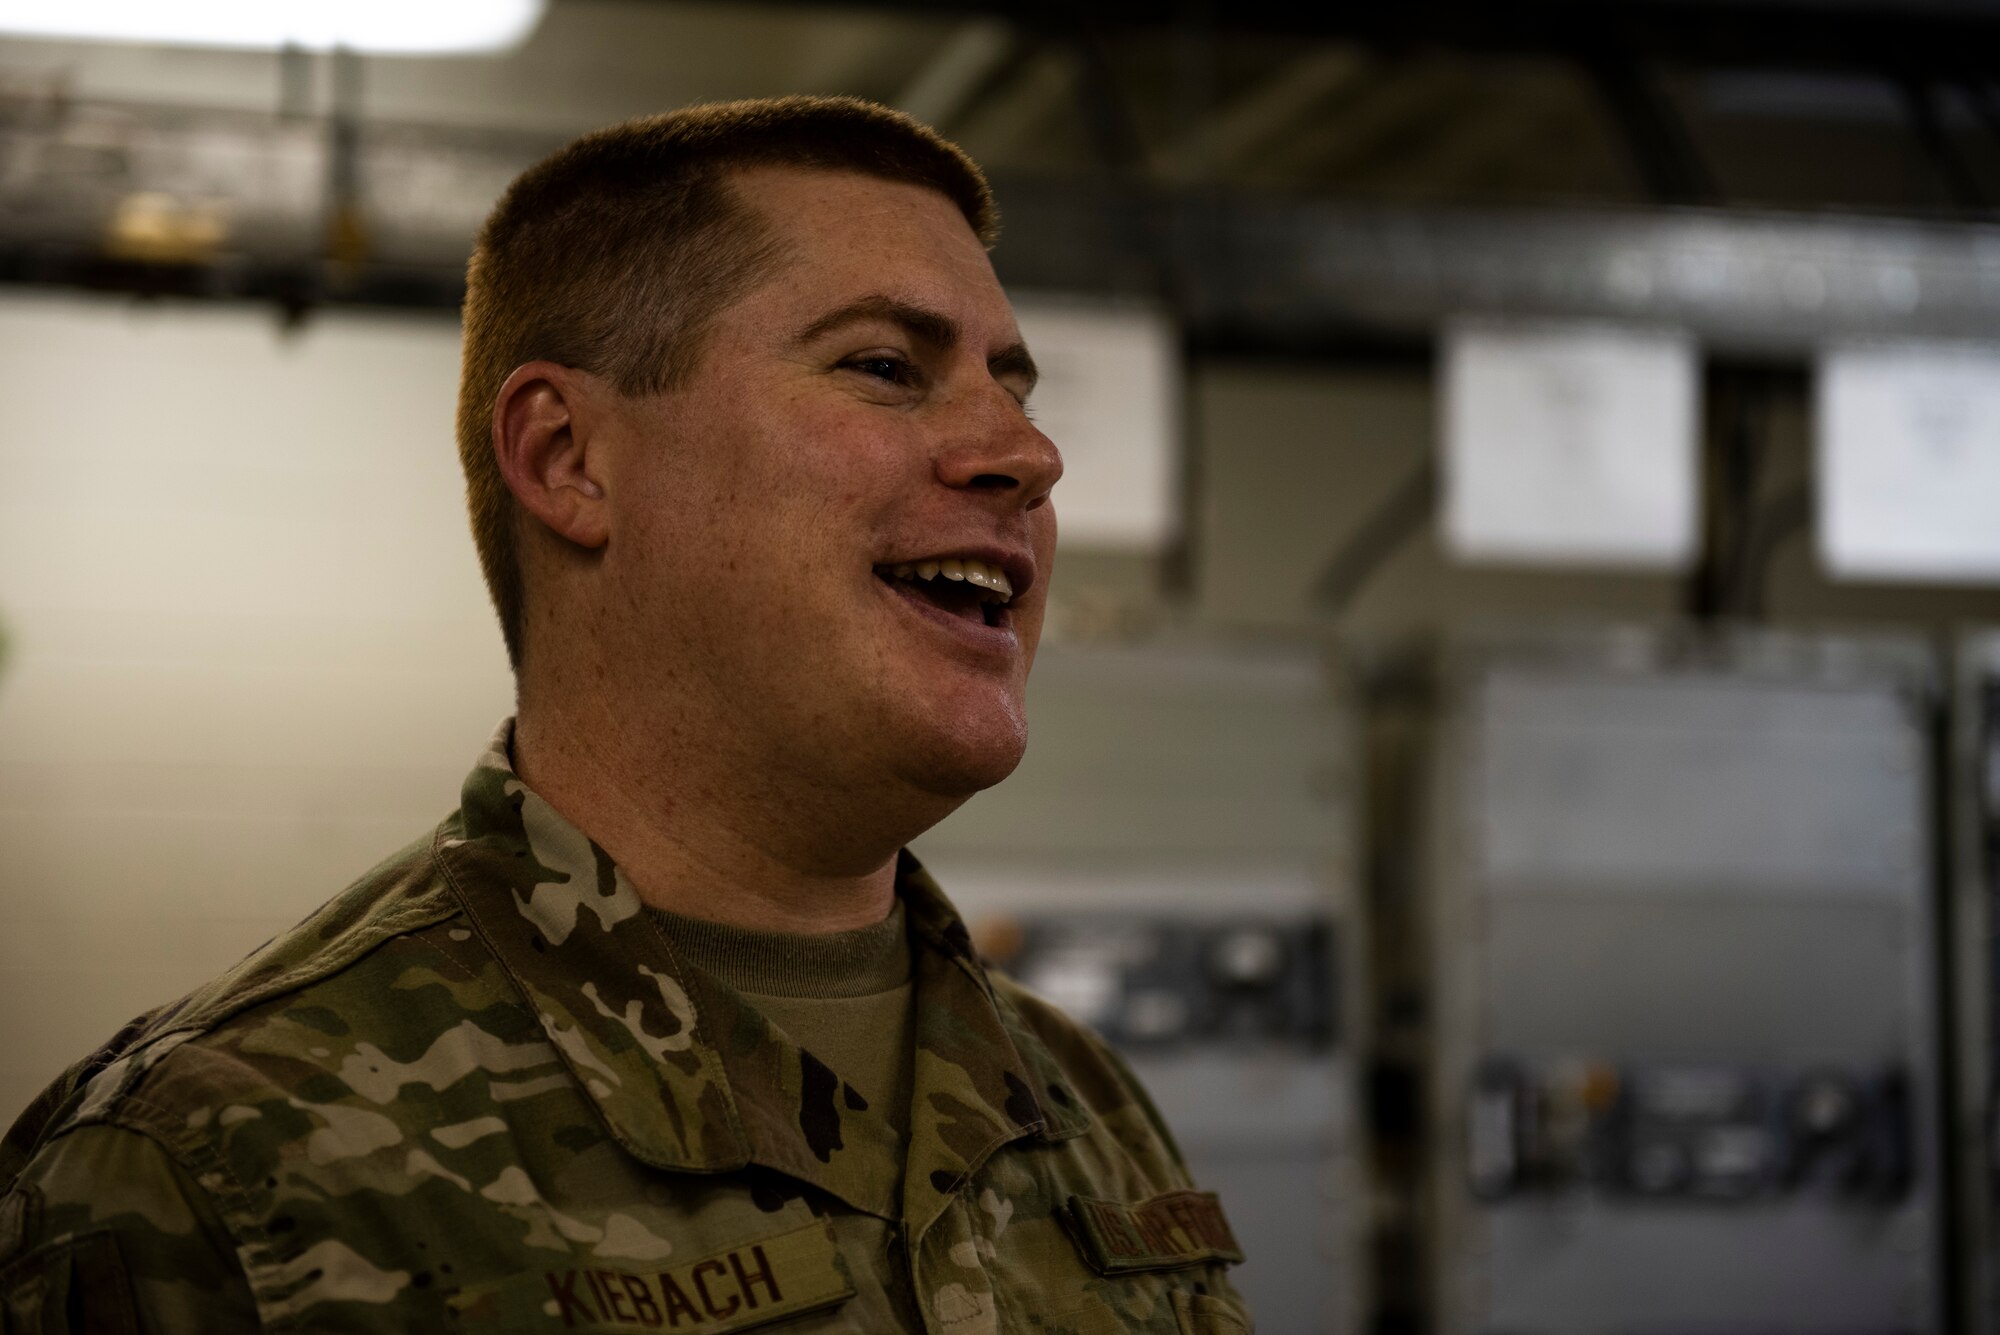 U.S. Air Force Staff Sgt. Christopher Kiebach, 325th Operations Support Squadron Radar, Airfield, and Weather Systems supervisor has a conversation at Tyndall Air Force Base, Florida, Nov. 26, 2019. Kiebach and his team maintain air traffic and control systems for Tyndall including all means of communication from air traffic controllers to aircraft operators via radio, as well as interagency communication via telephones. Kiebach is originally from Sierra Vista, Arizona, and has been in the service for ten years. (U.S. Air Force photo by Staff Sgt. Magen M. Reeves)